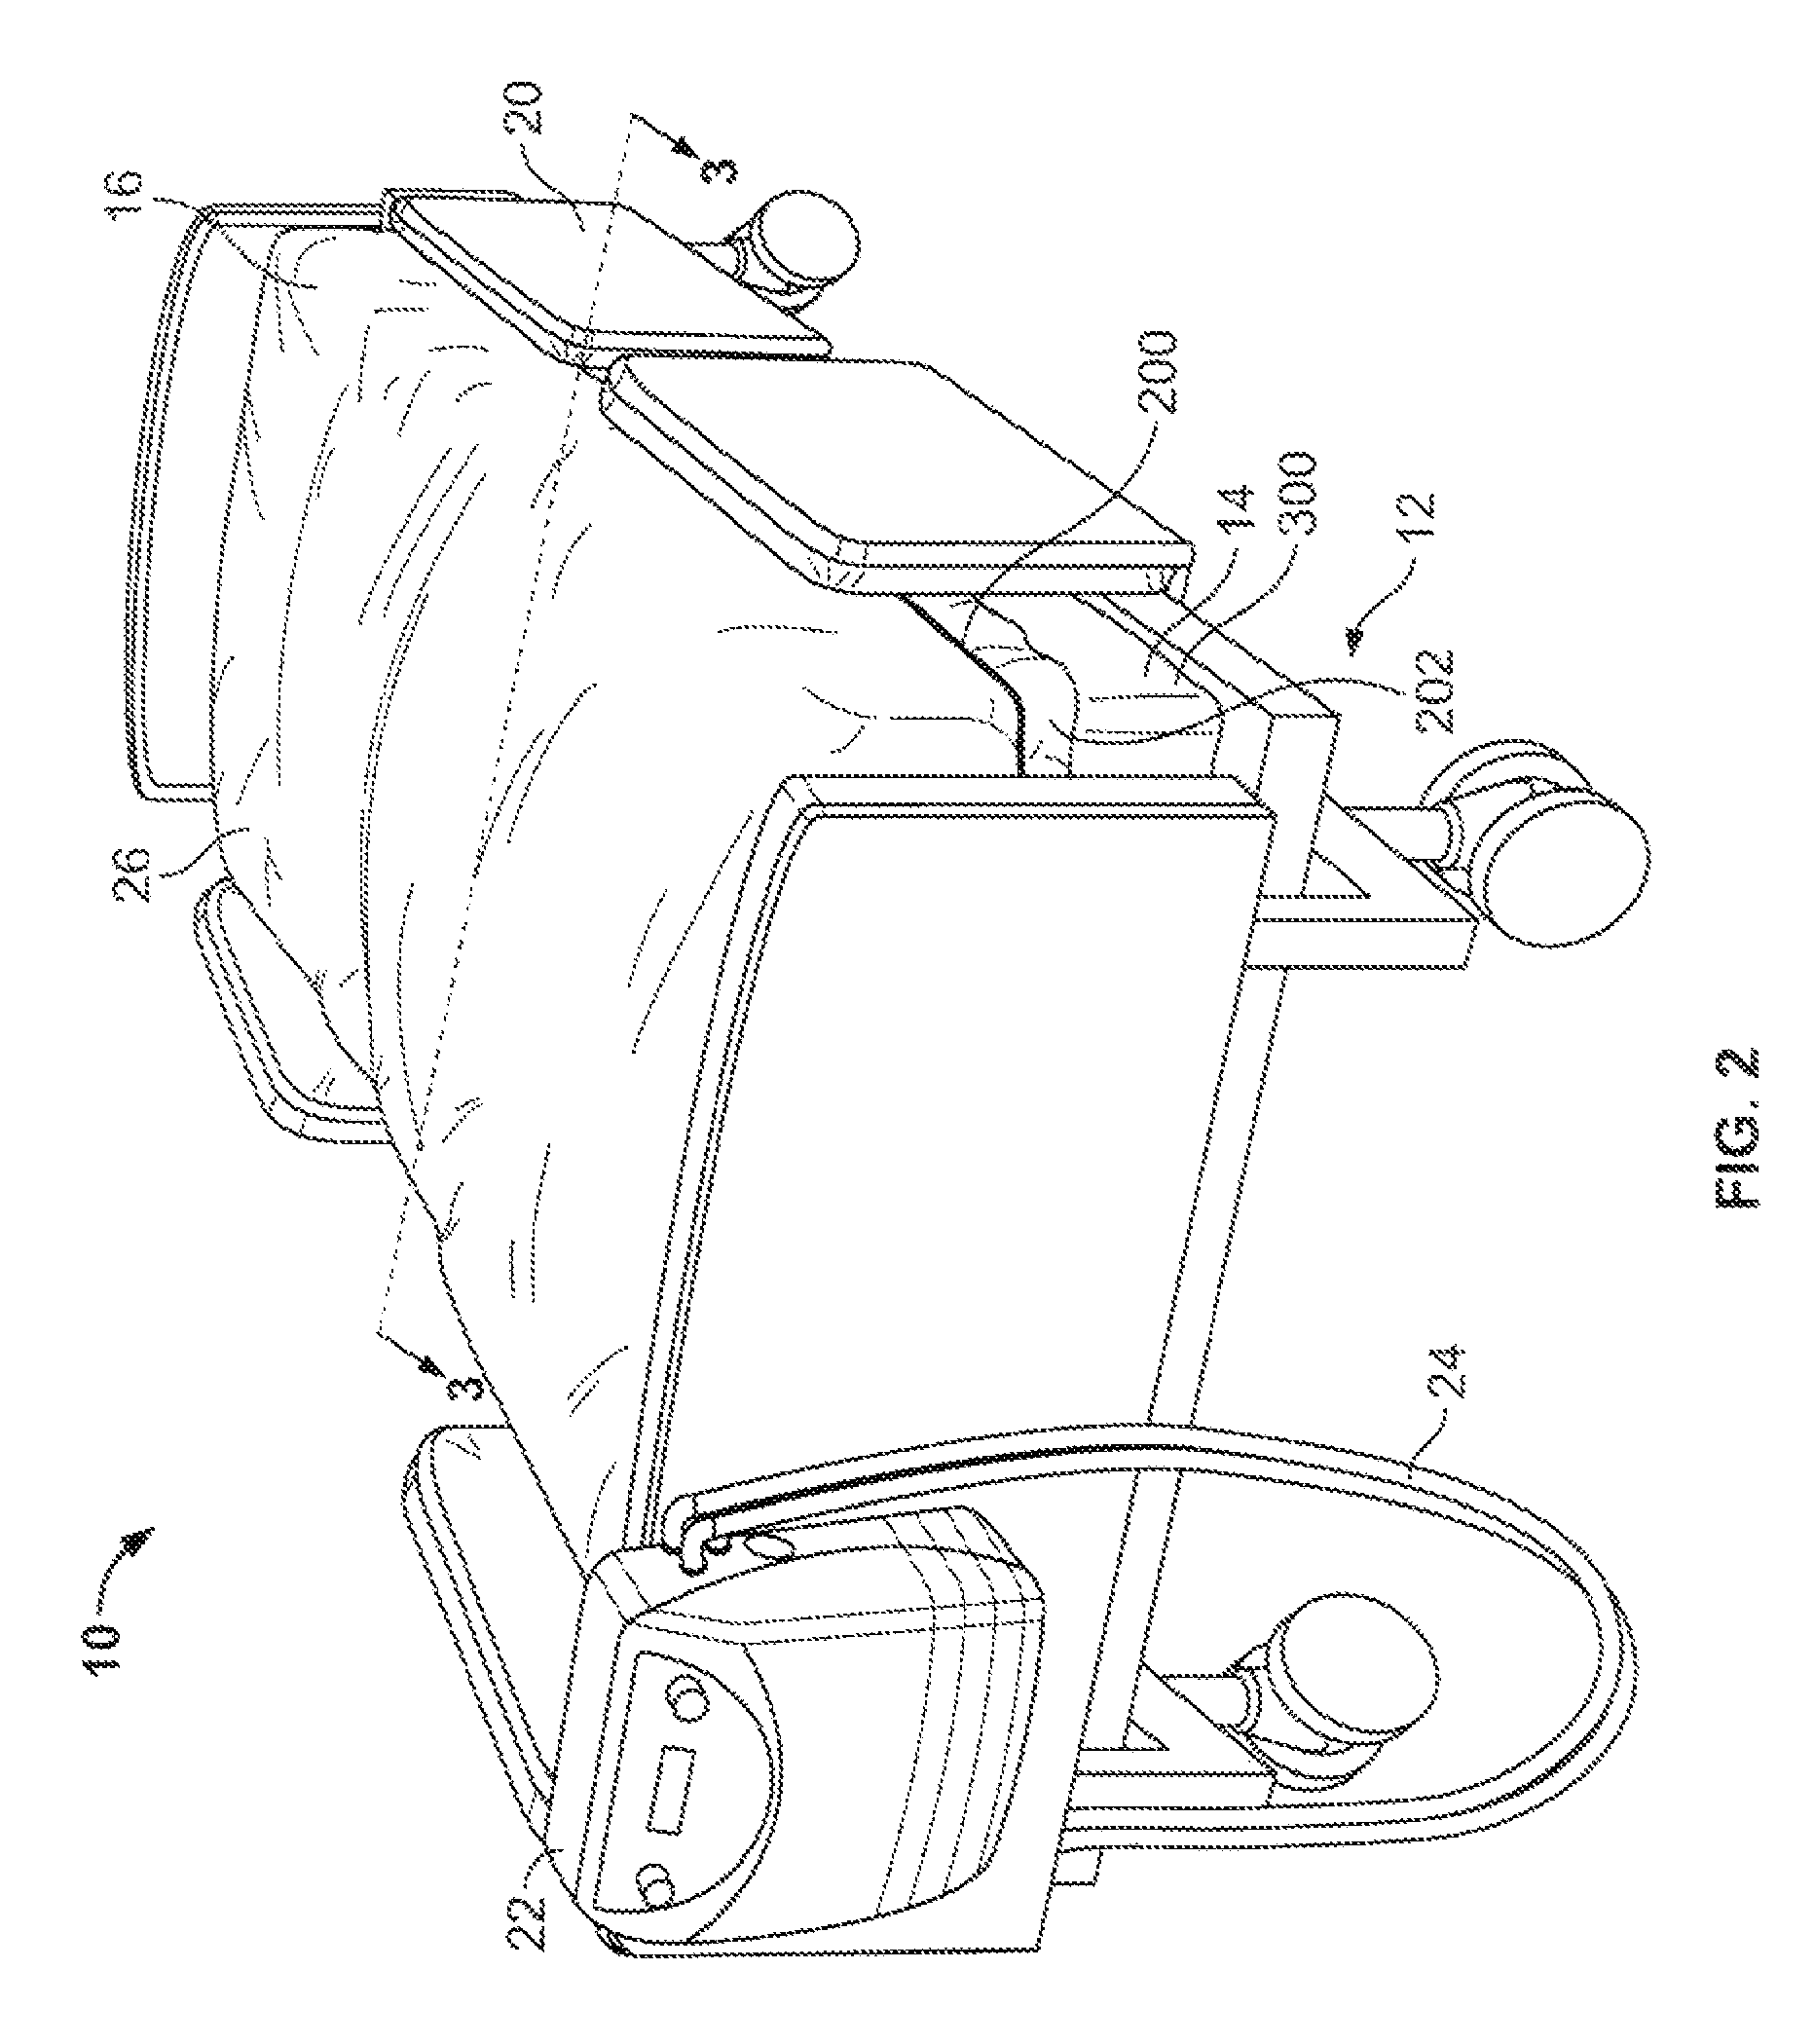 Multi-chamber air distribution support surface product and method